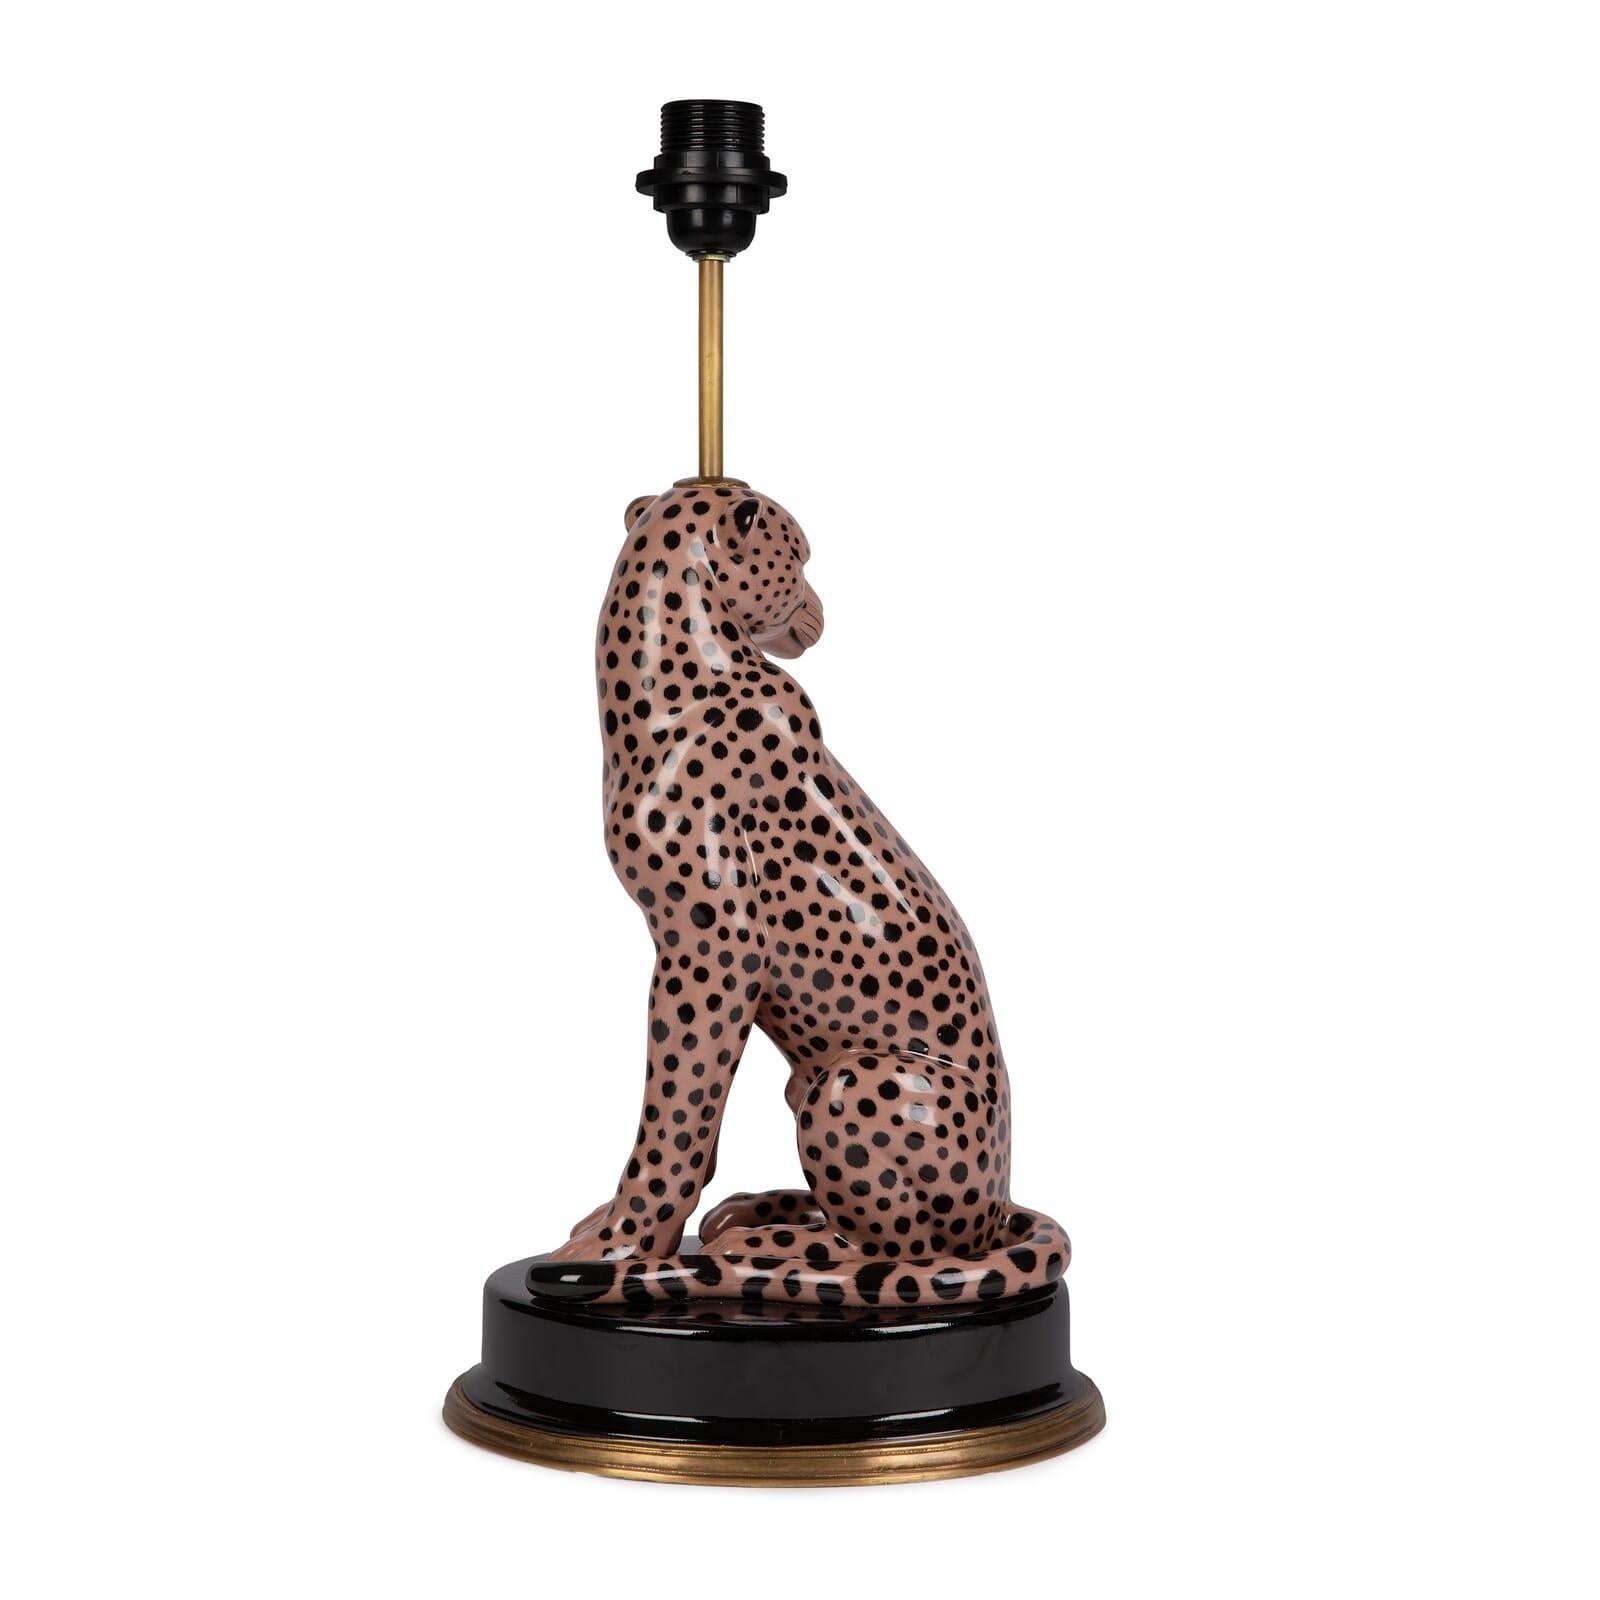 Bring the beauty of the animal kingdom into your home with this exquisite cheetah lamp-stand. Crafted from hand painted porcelain with a brass frame at the base, this love forever stand looks doubly stylish when paired with one of our printed